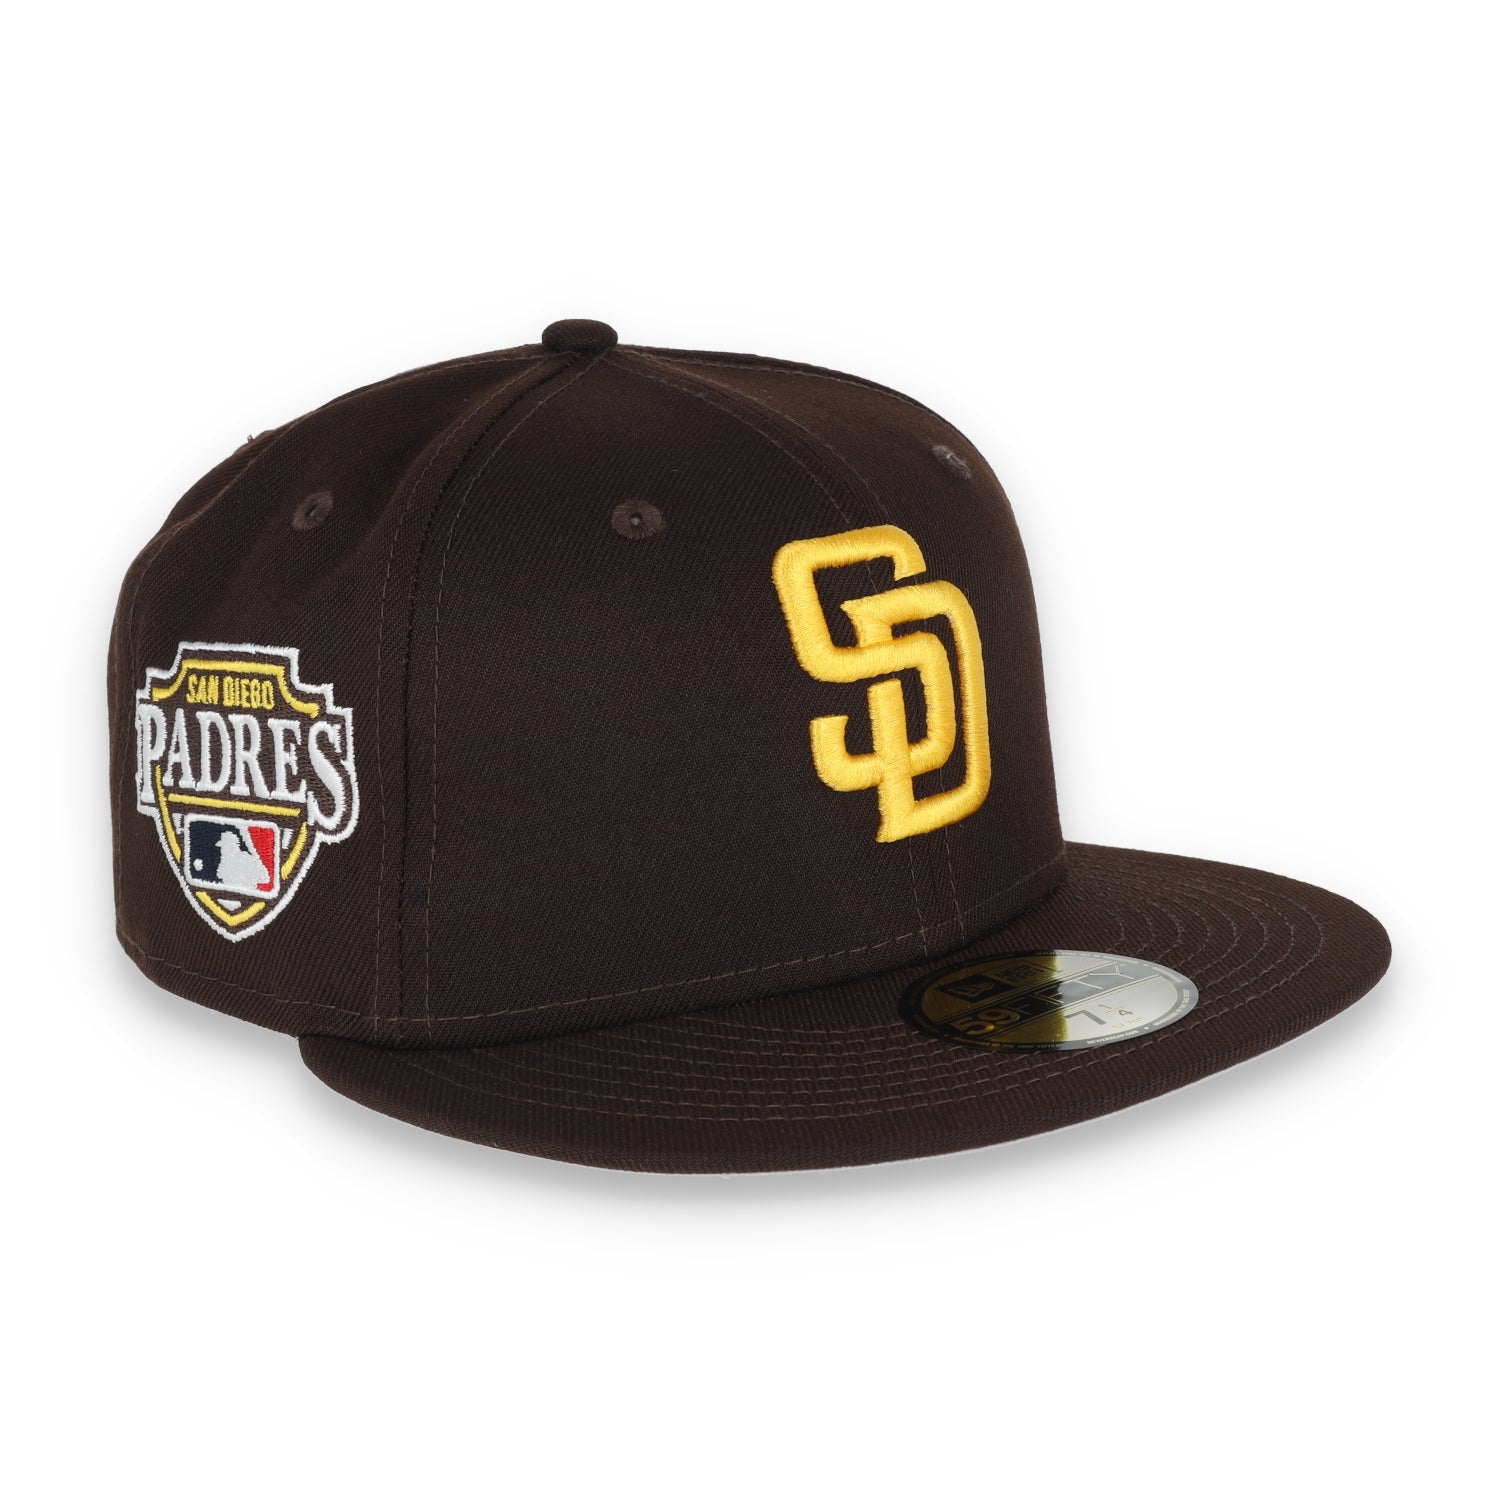 New Era San Diego Padres Team Name Side Patch 59FIFTY Fitted Hat